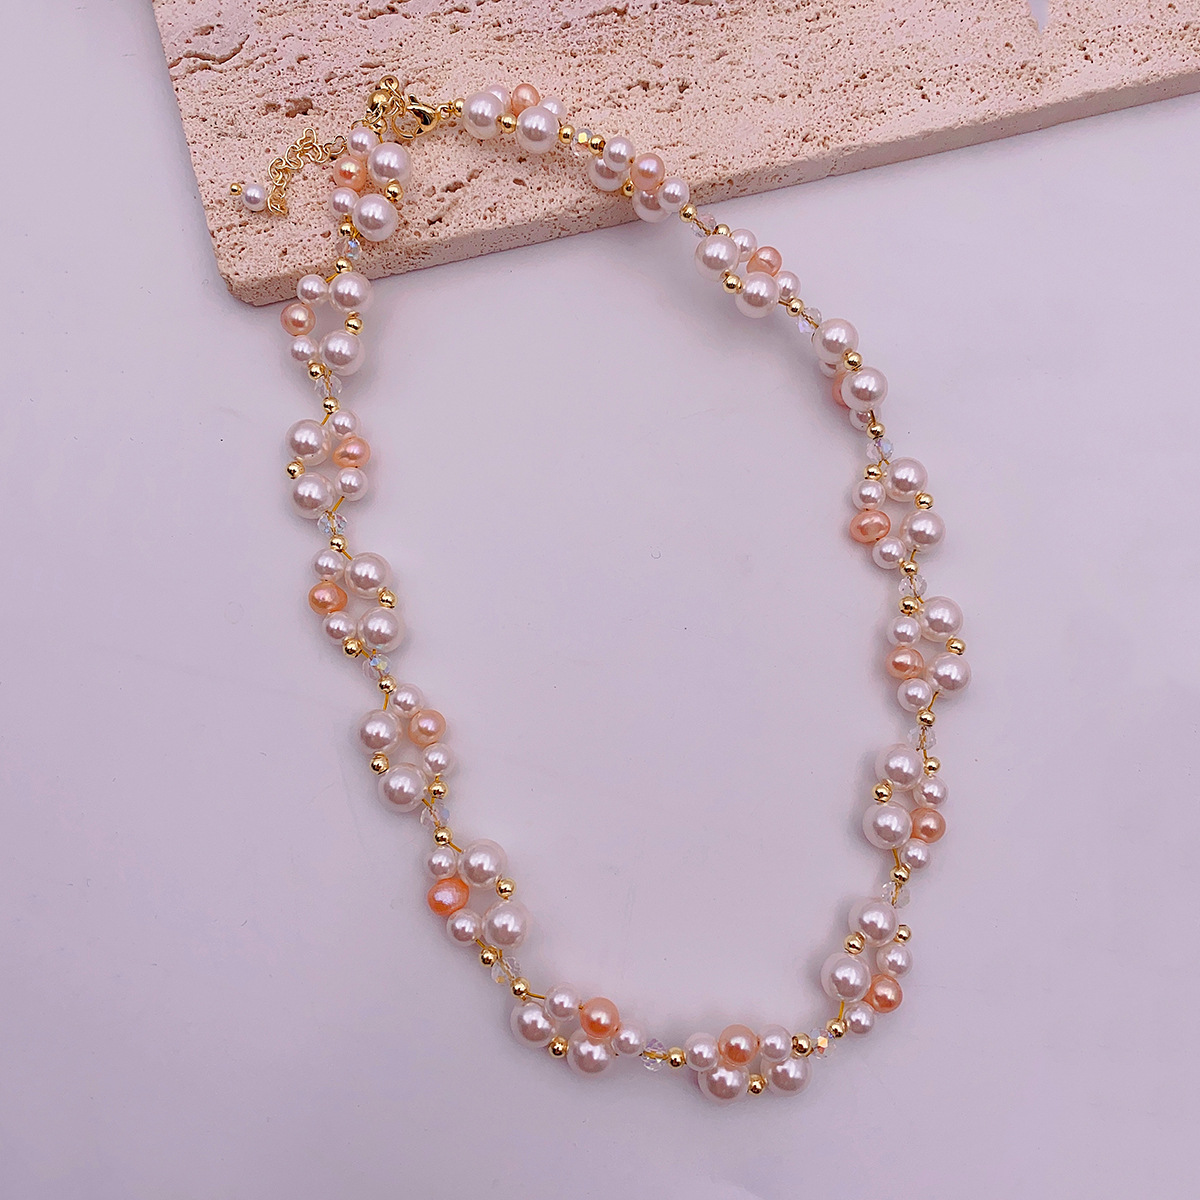 Glass beads + freshwater pearl necklace